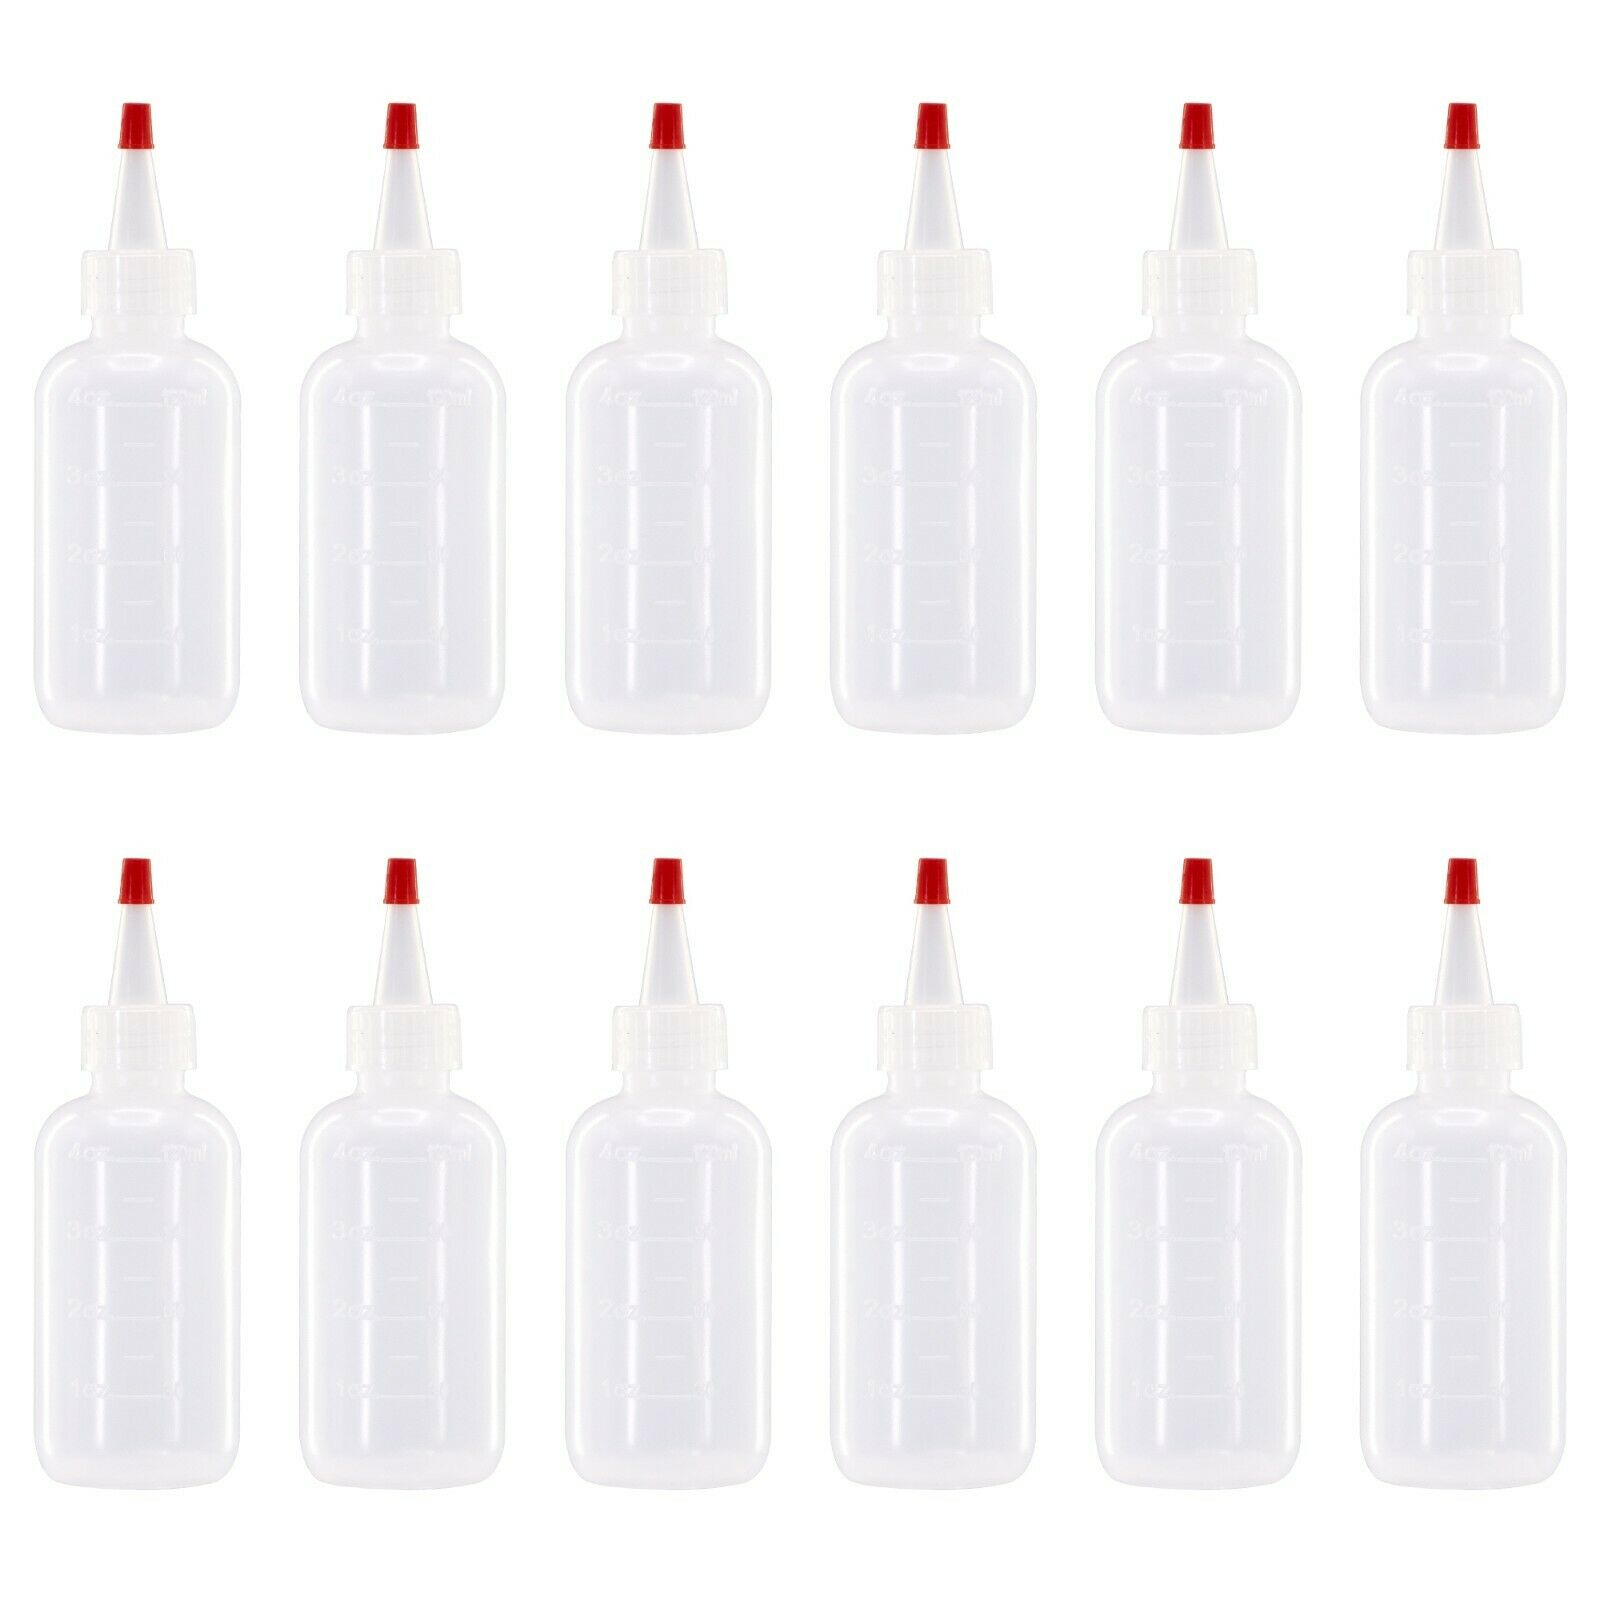 12 Pack Of 4oz (120ml) Plastic Boston Round Squeeze Bottles + Yorker Caps Ldpe